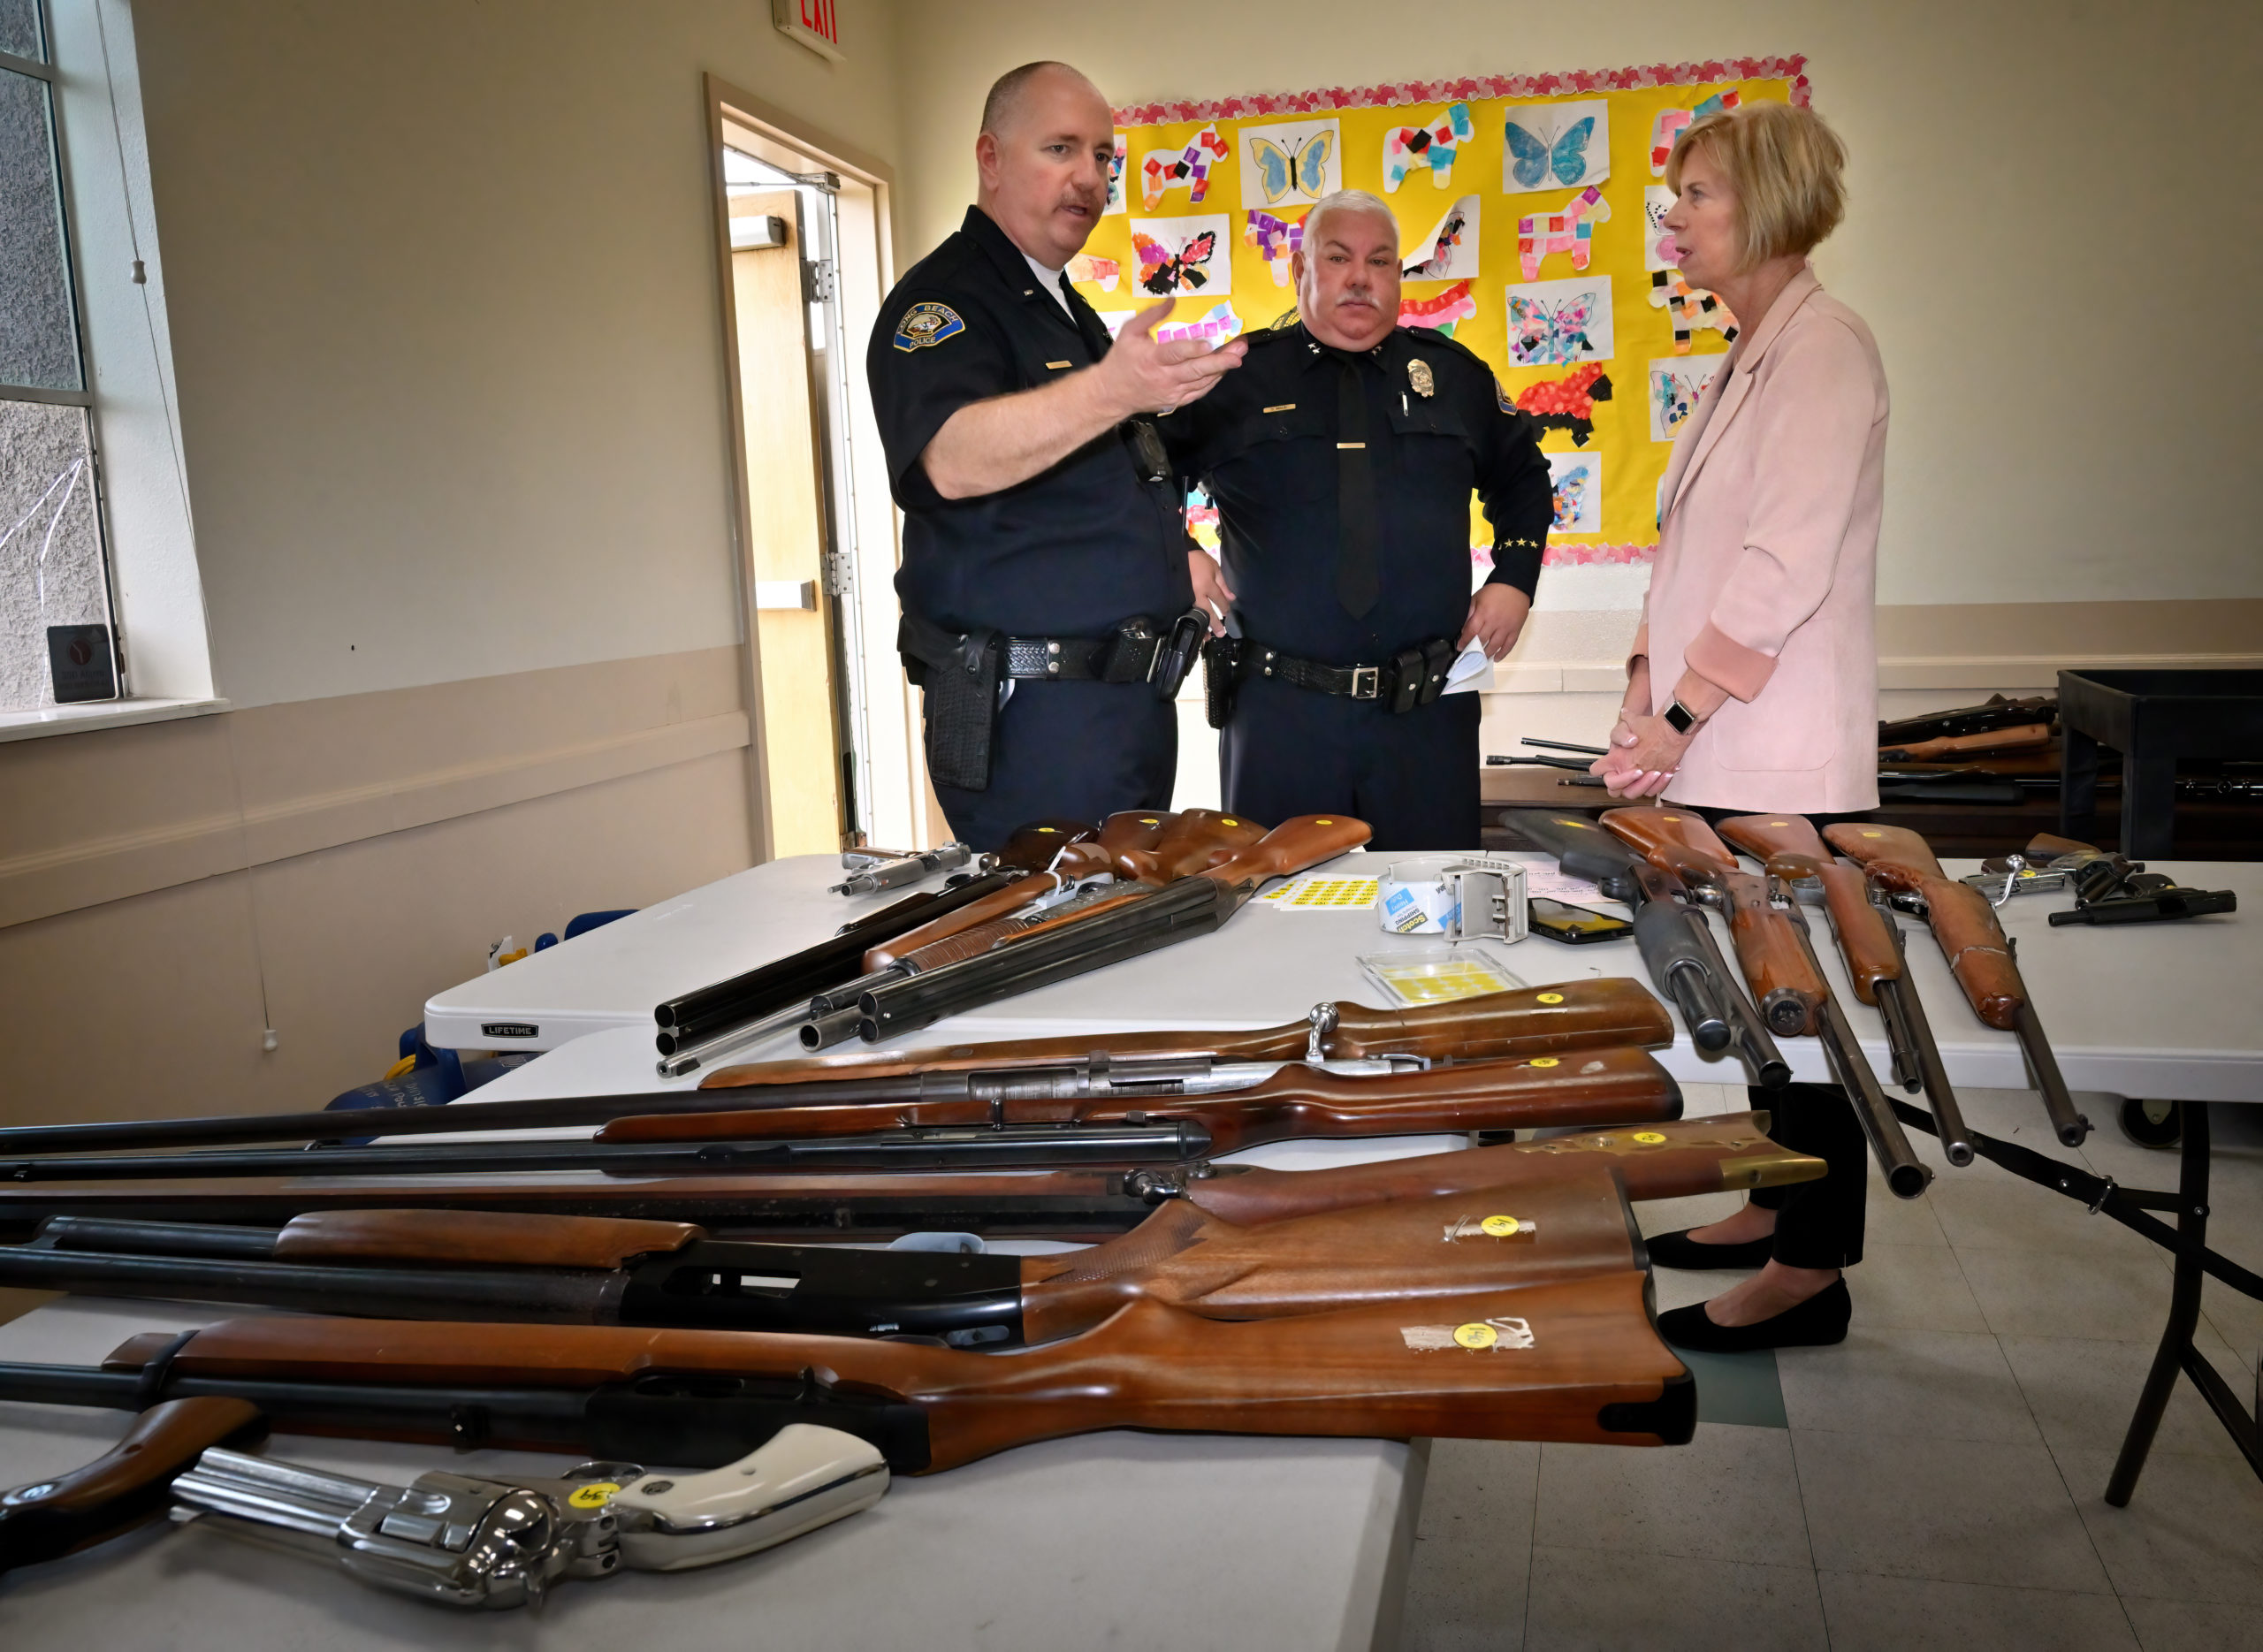 252 Firearms collected at Gun Buy-Back with Supervisor Hahn and LBPD